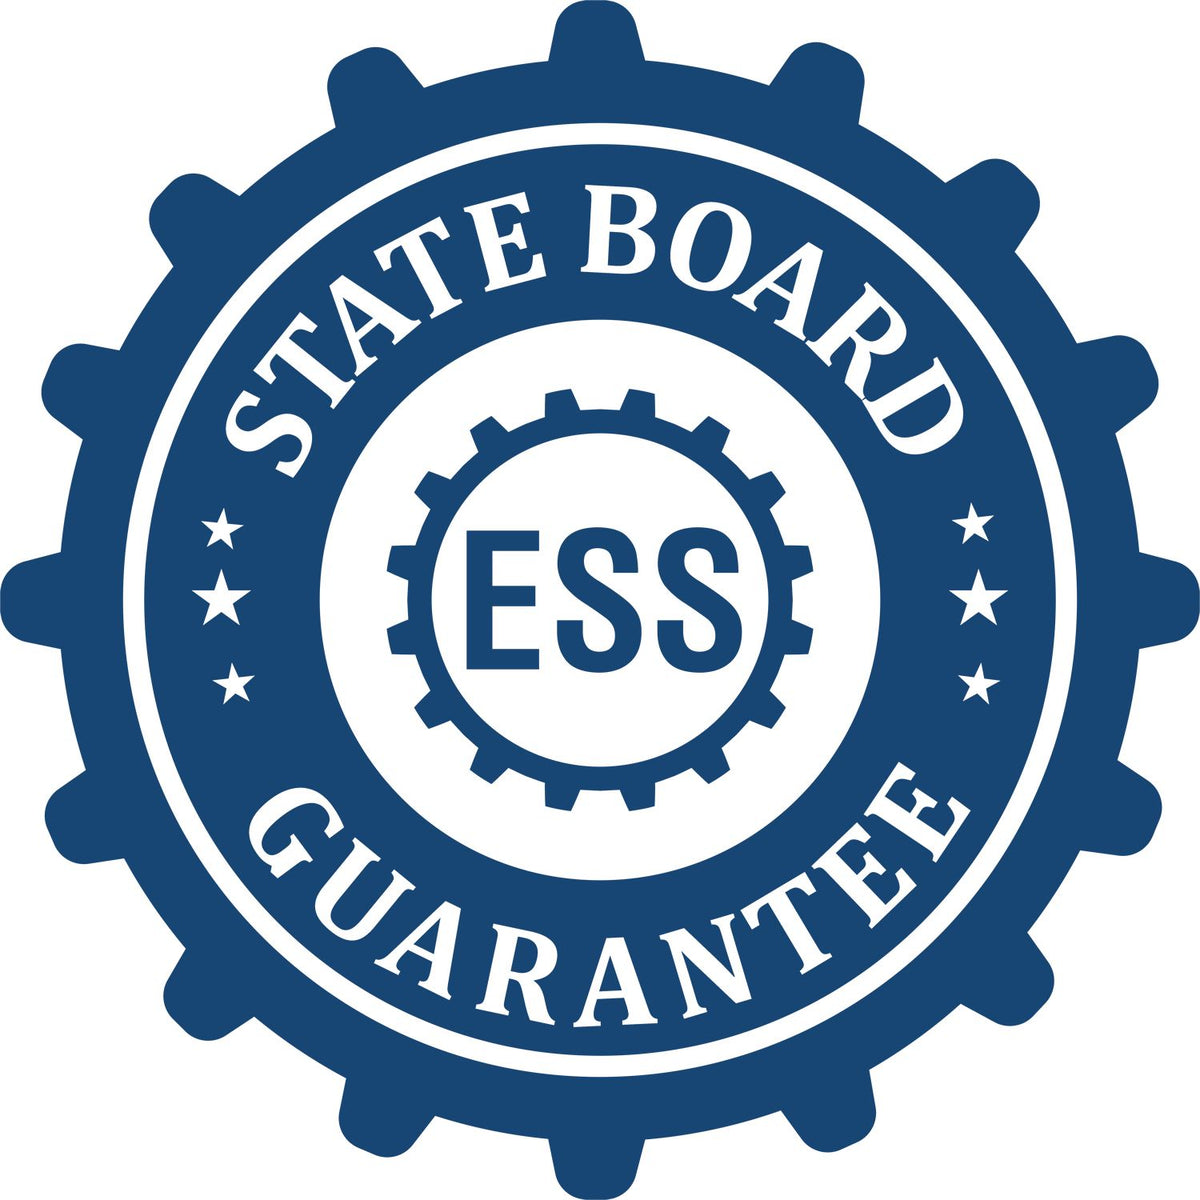 An emblem in a gear shape illustrating a state board guarantee for the MaxLight Premium Pre-Inked Missouri Rectangular Notarial Stamp product.